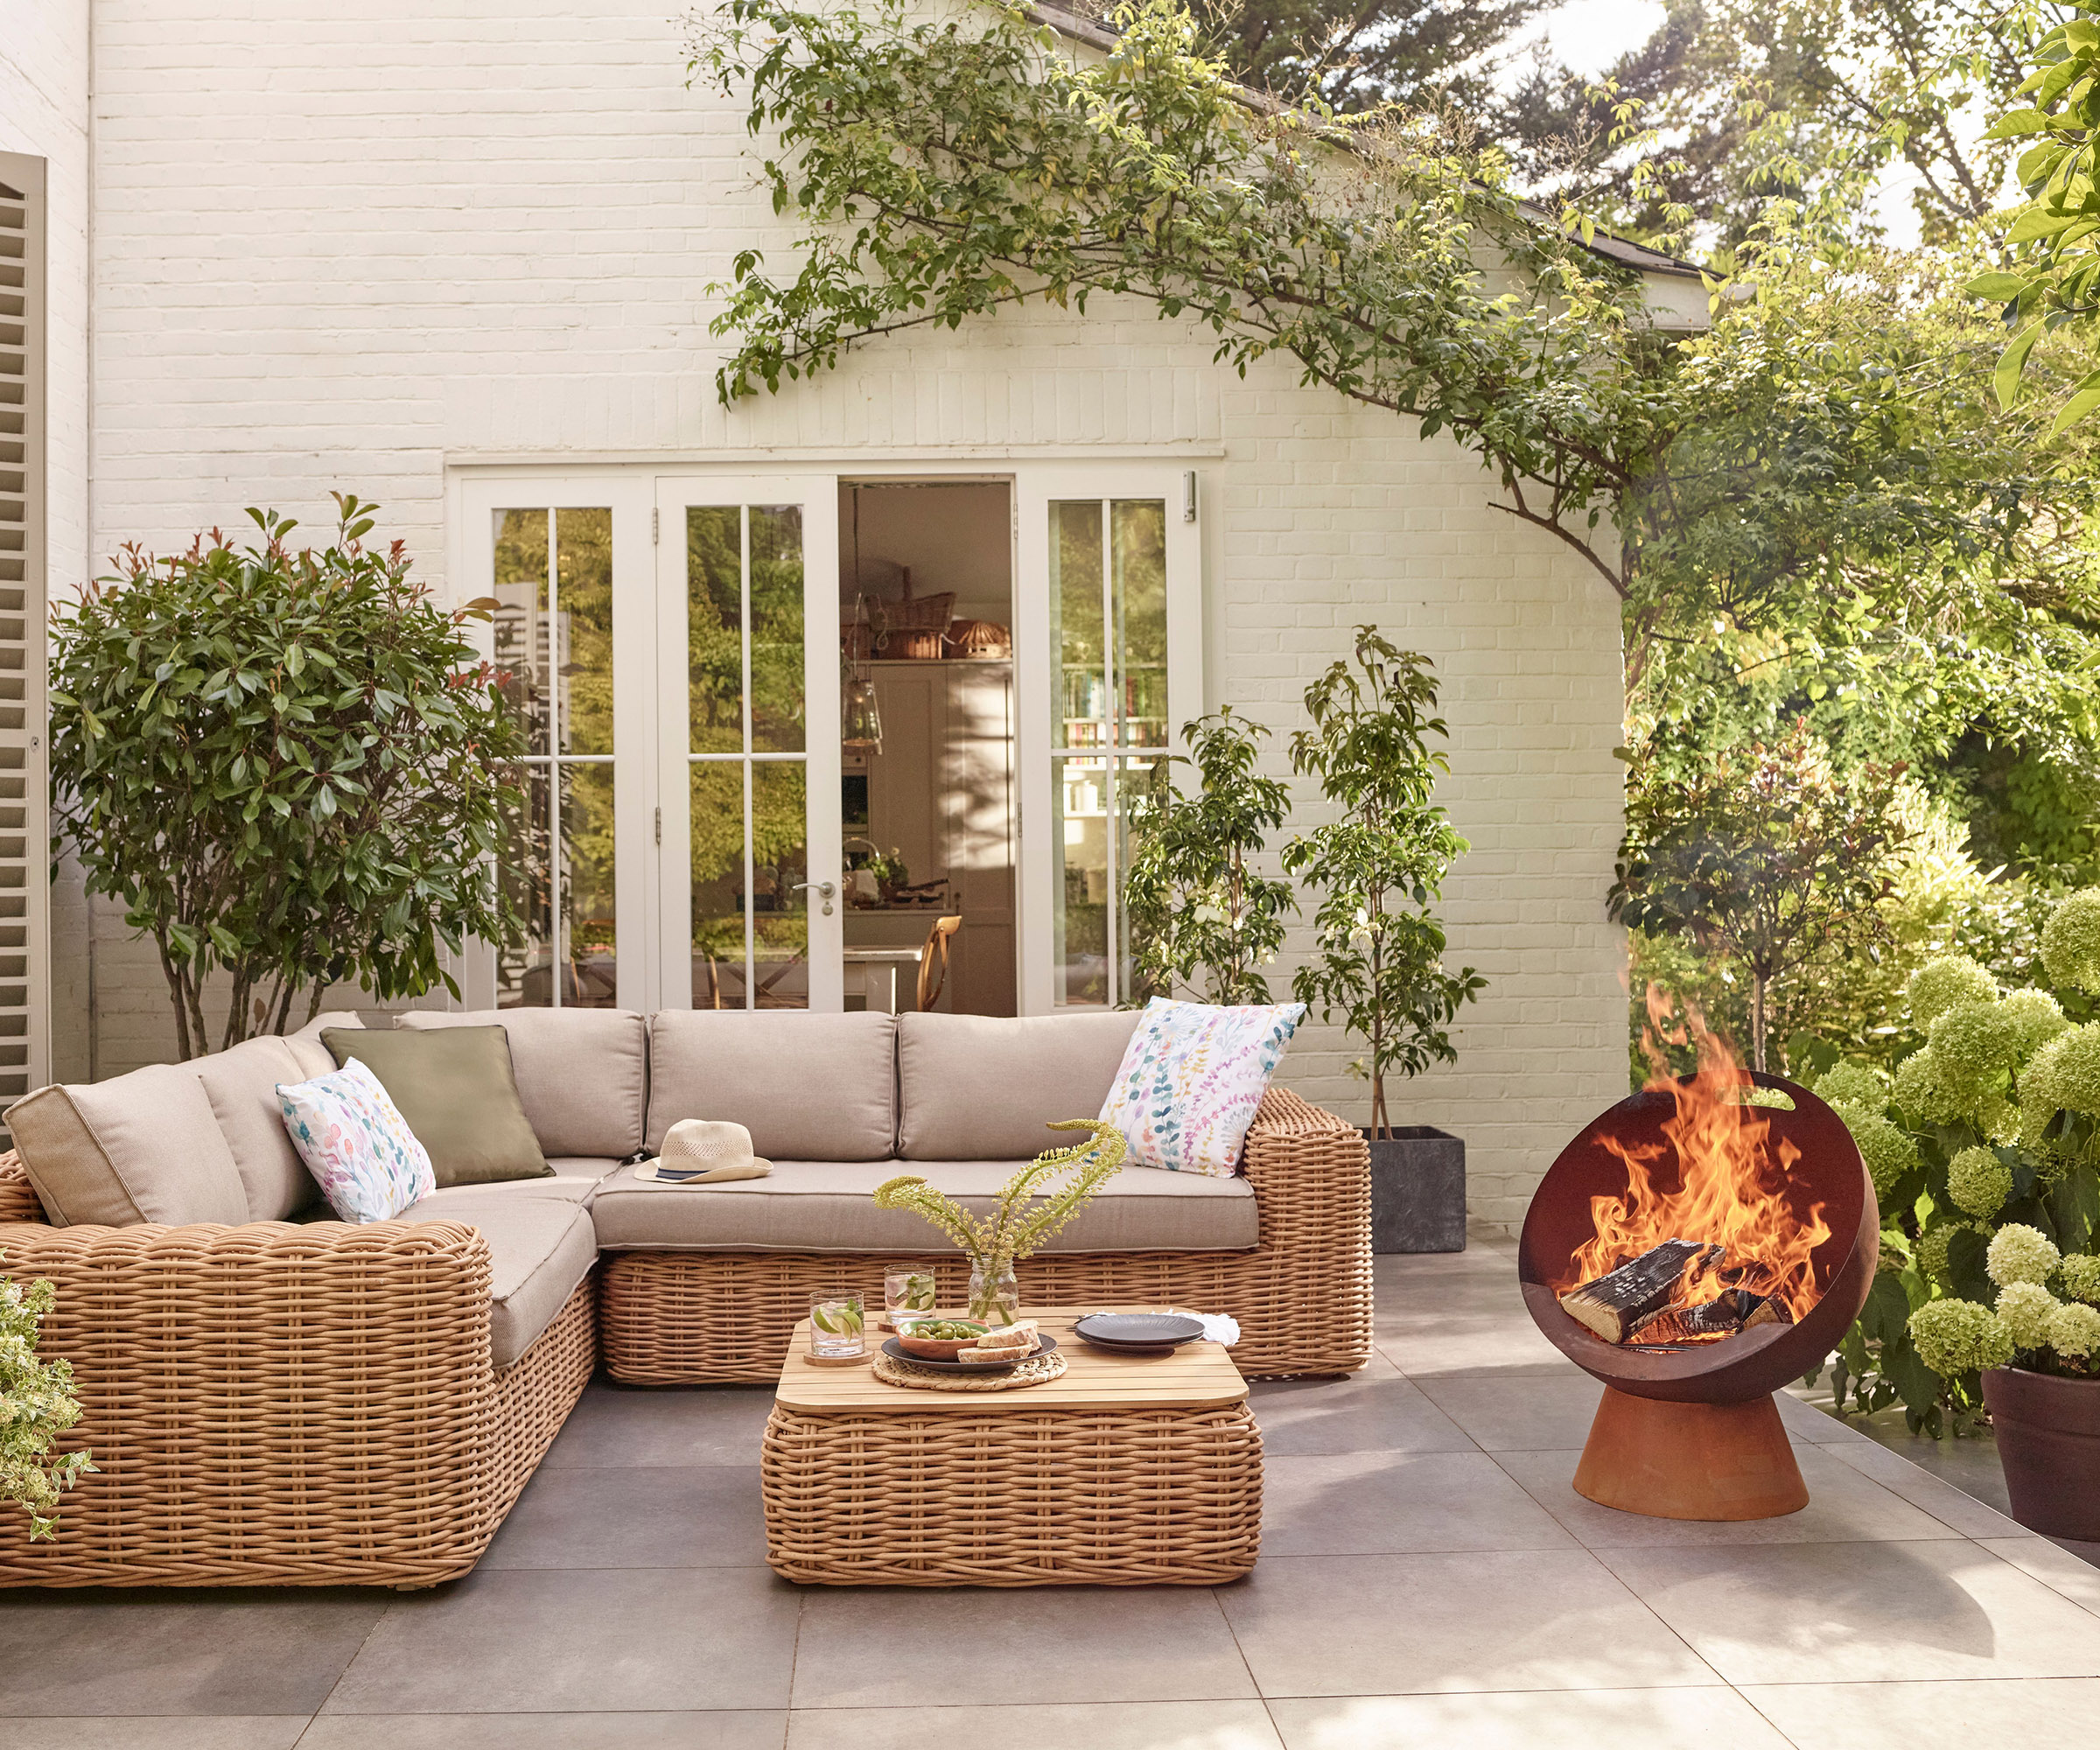 An outdoor sofa on a patio with a lit firepit